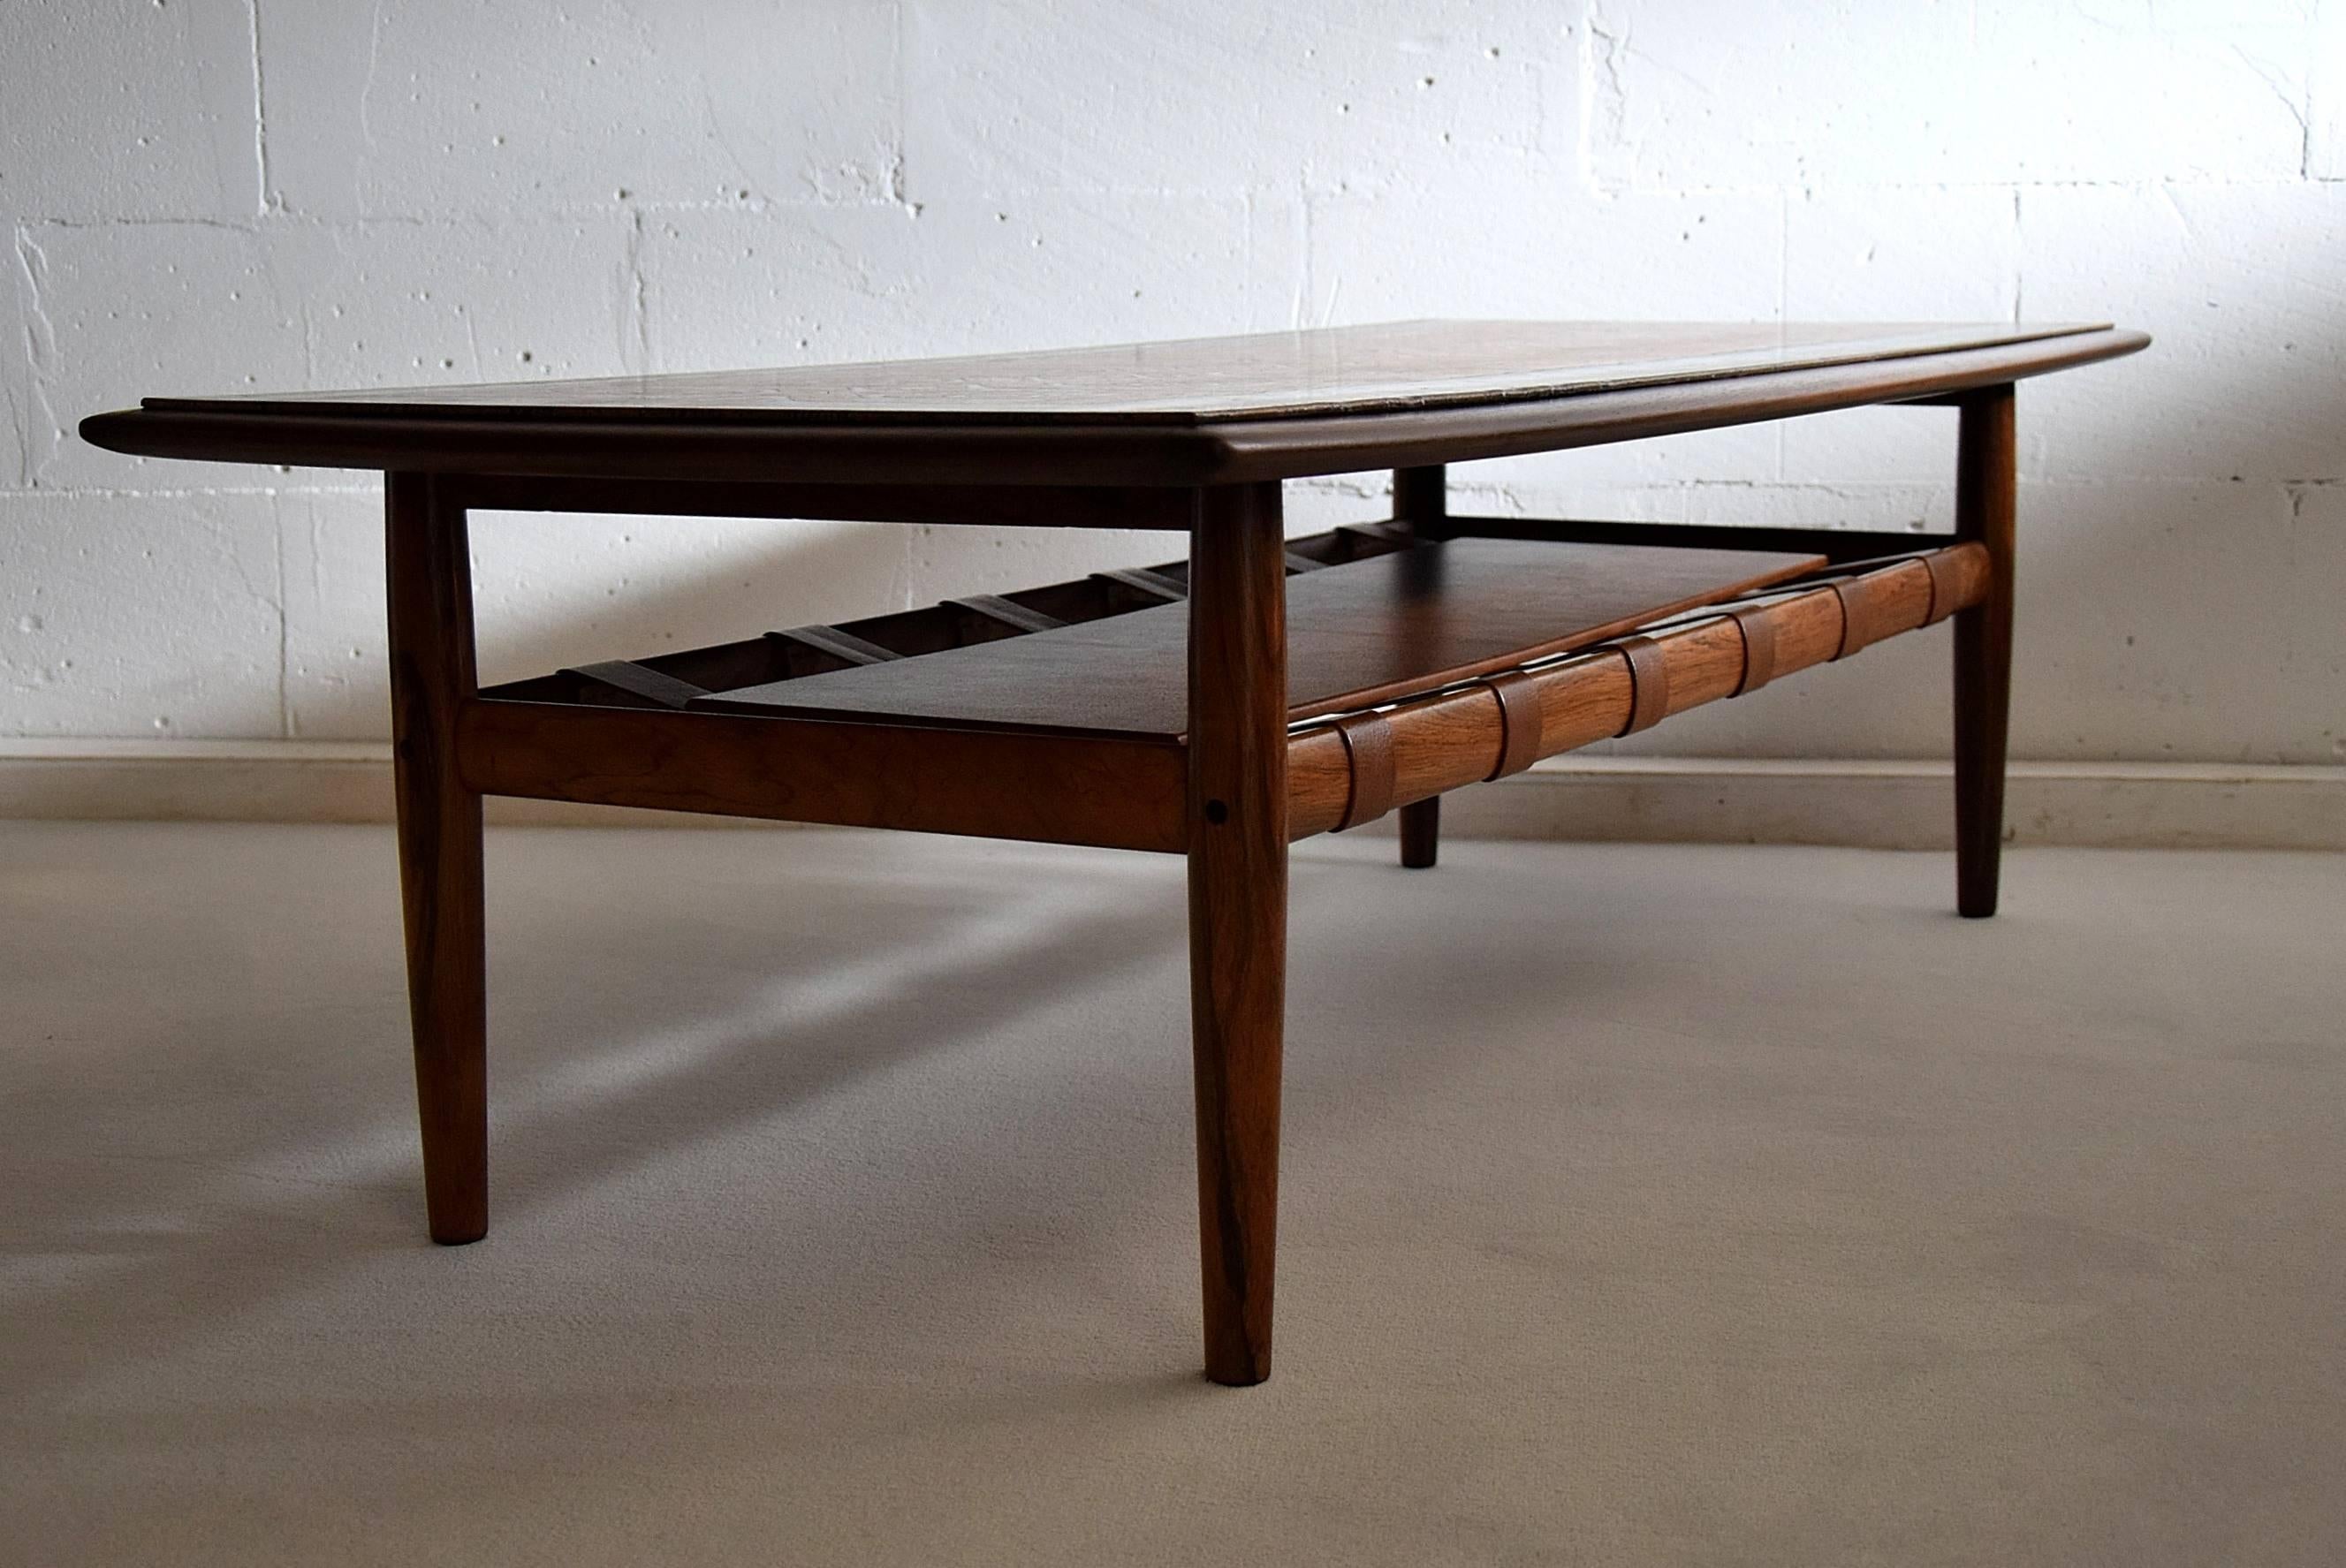 Jatoba and brass Mid-Century coffee table.
Stylish and classy coffee table produced in northern Italy in 1969 on commission. This rare beauty, in great condition, could very well be a one of a kind.

Measurements : L 150 x W 65 x H 43cm.

This table